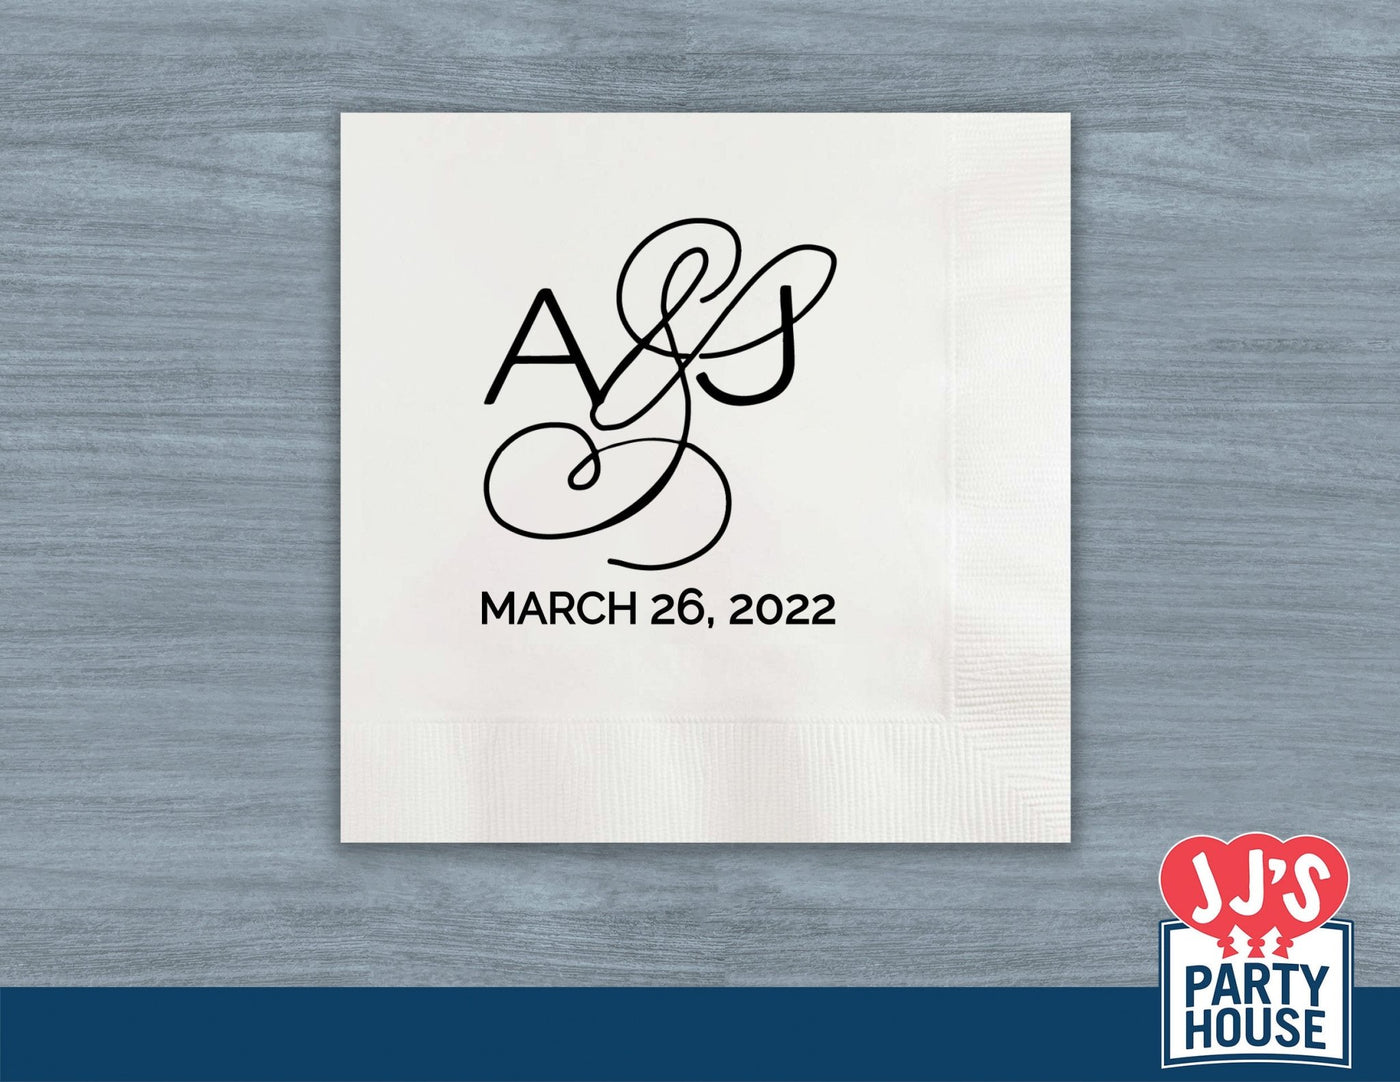 Bride and Groom Initials Custom and Personalized Wedding and Engagement Beverage Napkins - JJ's Party House